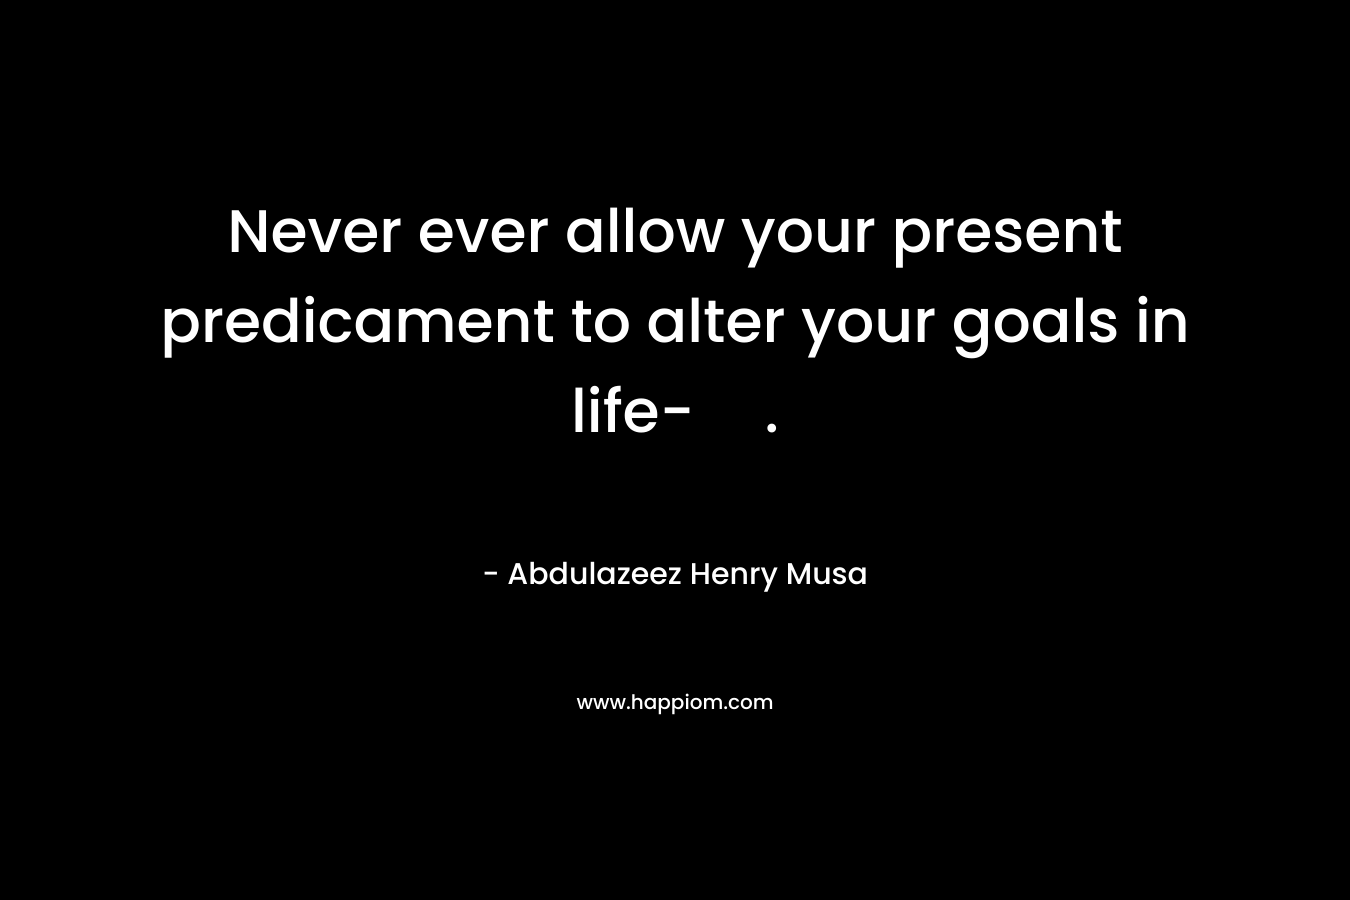 Never ever allow your present predicament to alter your goals in life-. – Abdulazeez Henry Musa